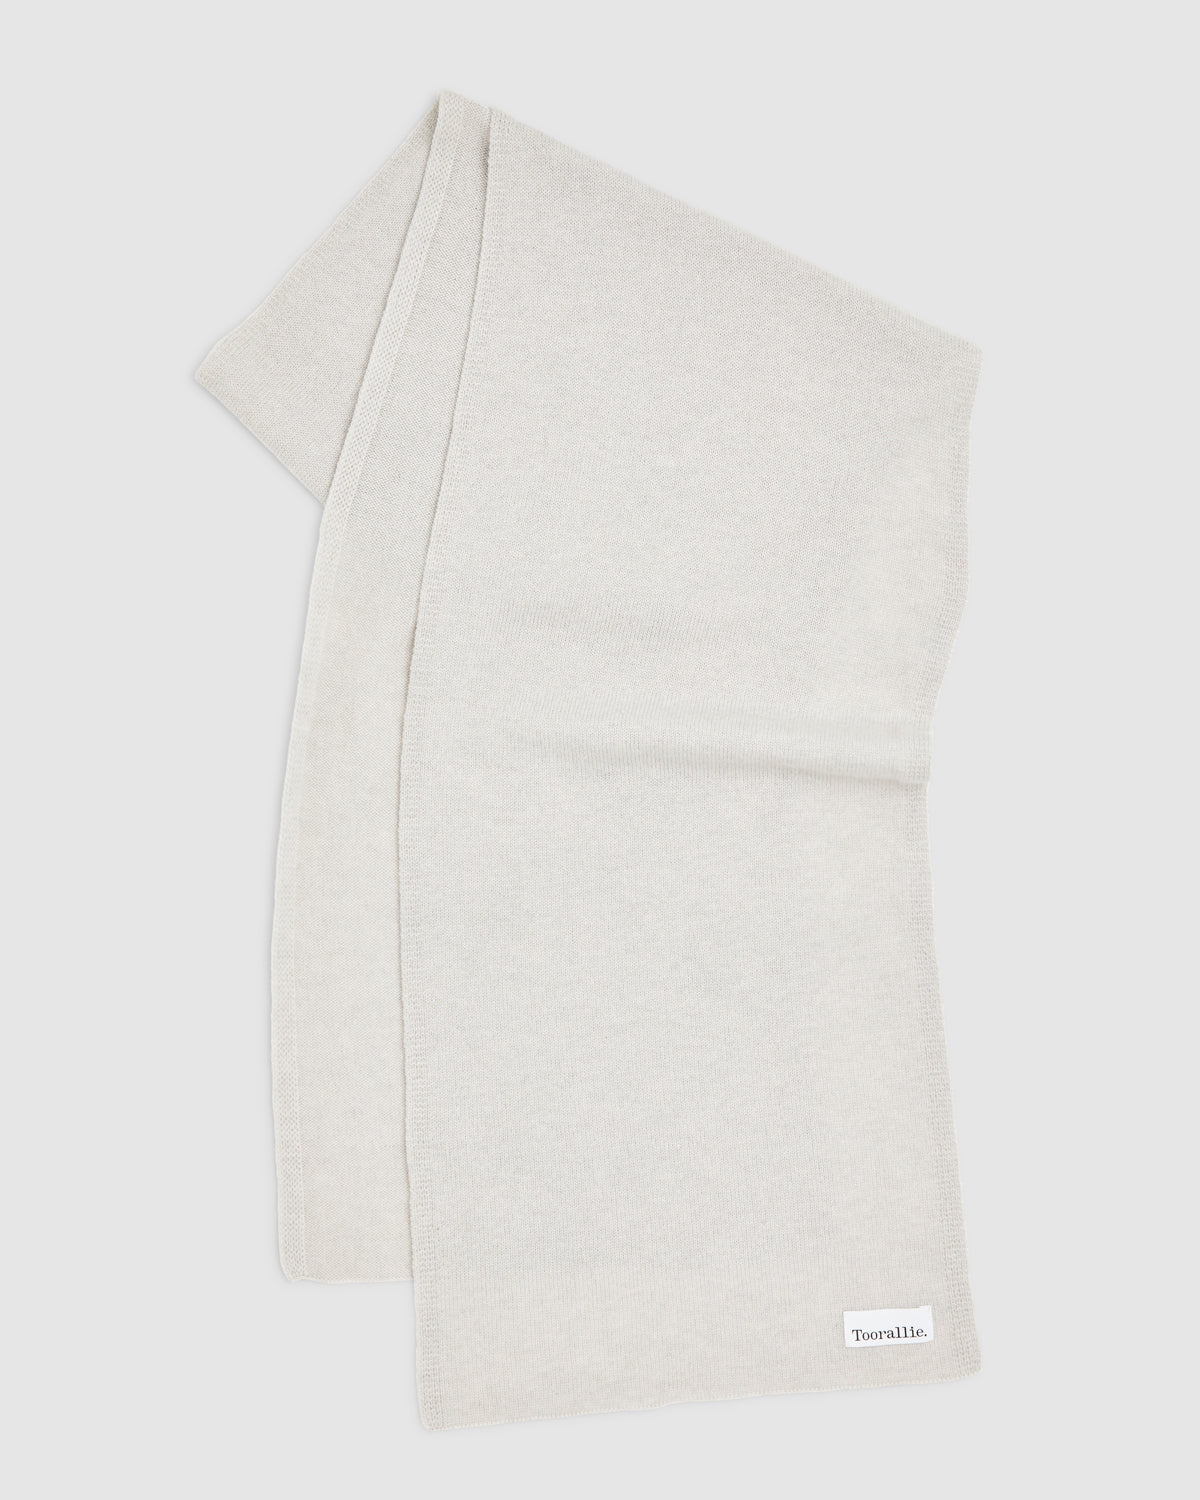 Stay cozy in style with our light grey fine wool scarf. A must-have accessory for any wardrobe.